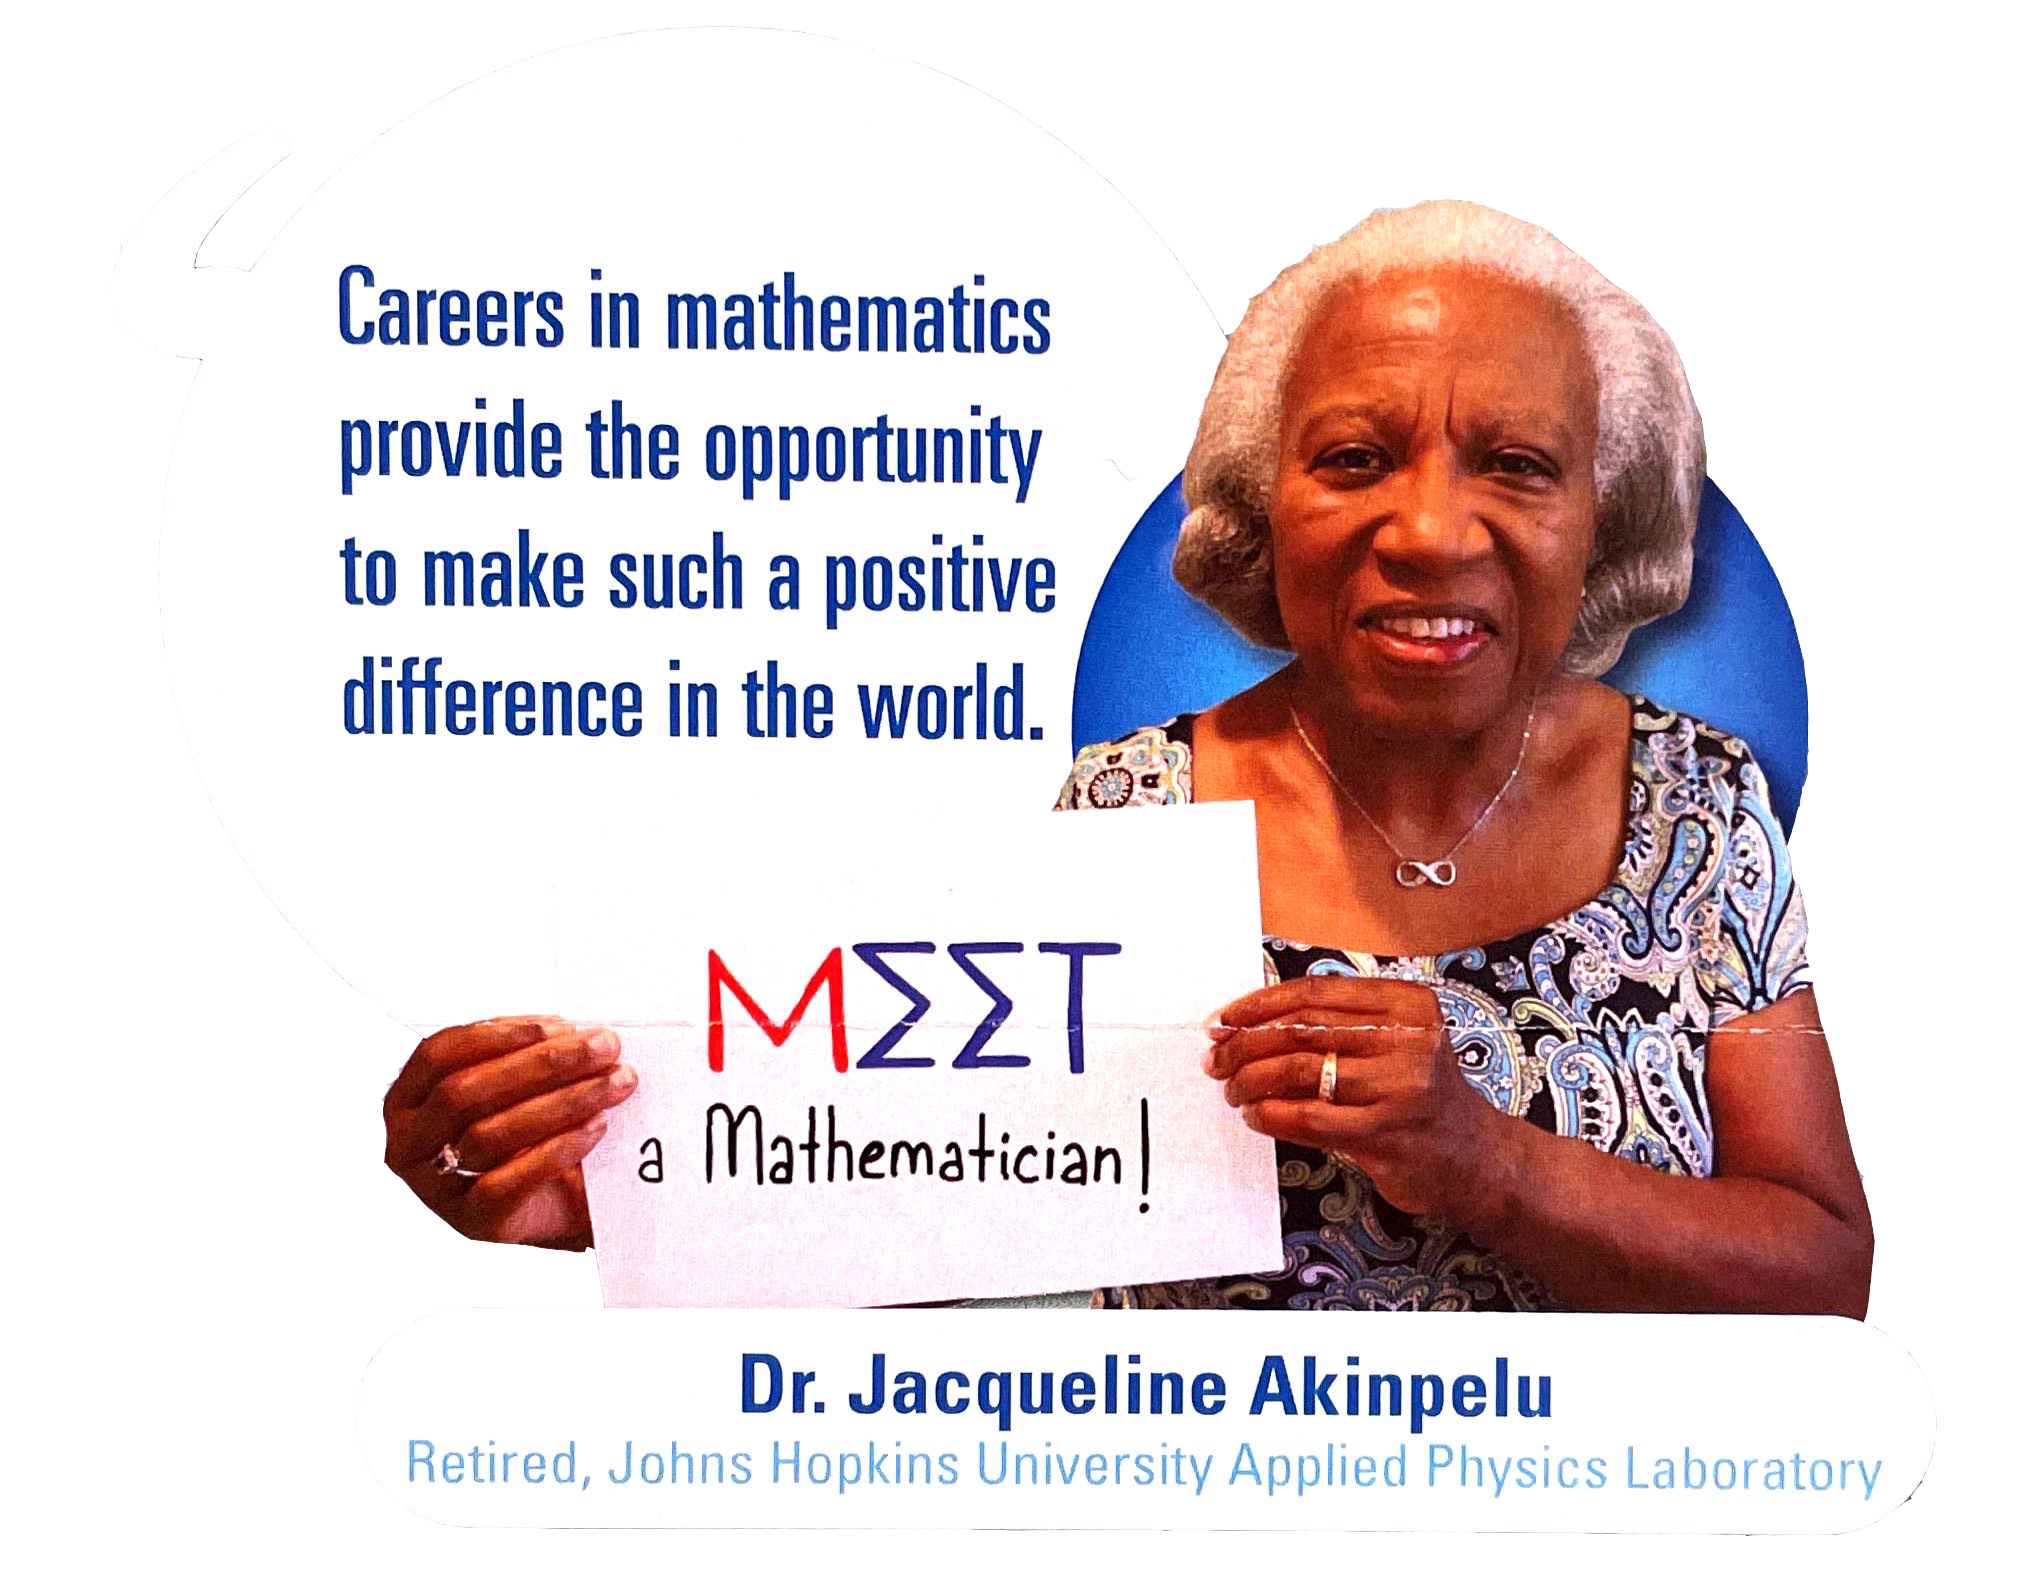 Spotlight: Meet a Mathematician - Dr. Jacqueline Akinpelu, Retired, Johns Hopkins University Applied Physics Laboratory. "Careers in mathematics provide the opportunity to make such a positive difference in the world."